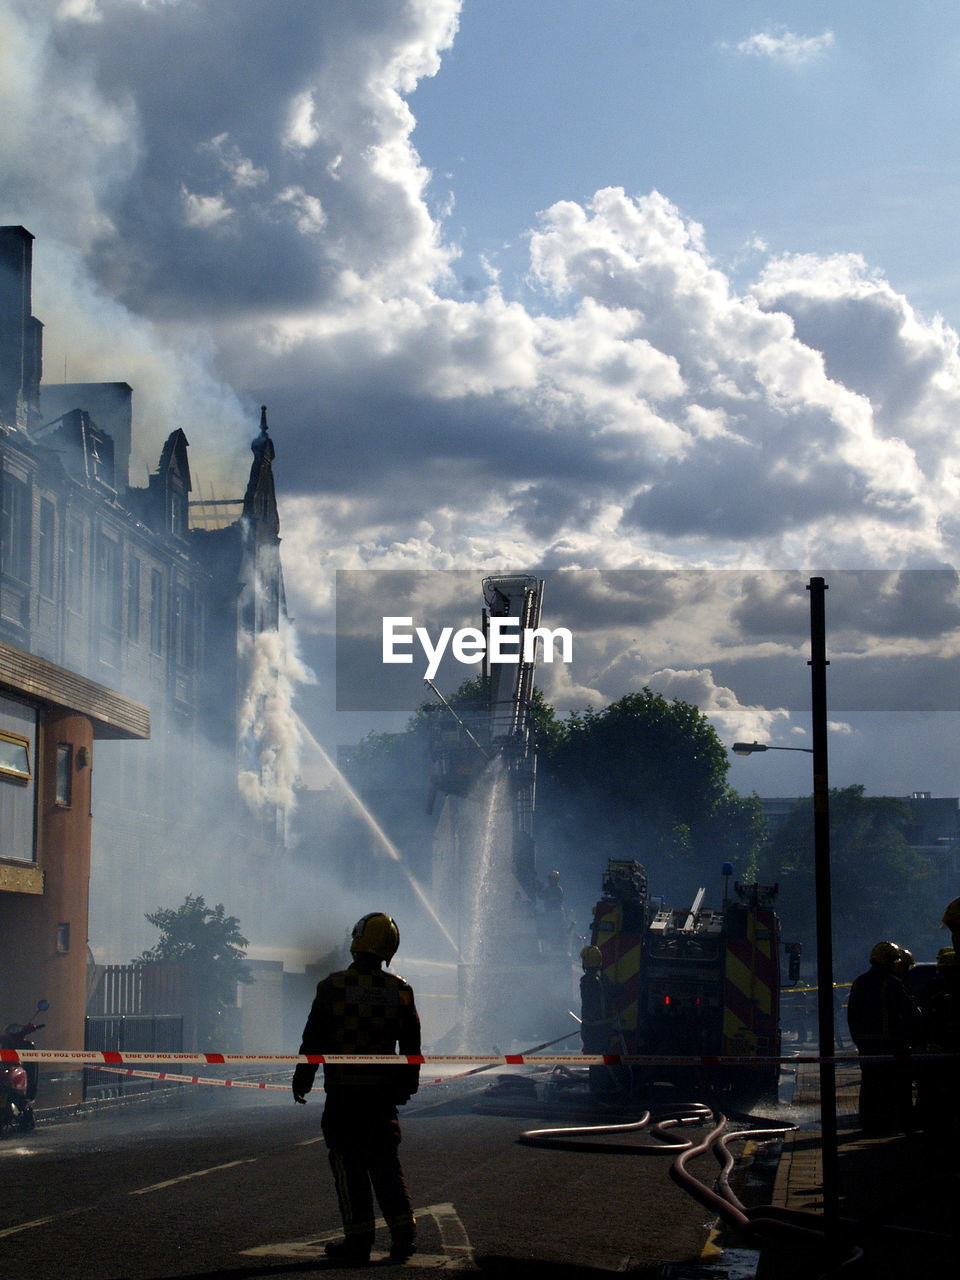 Water being sprayed on building during fire